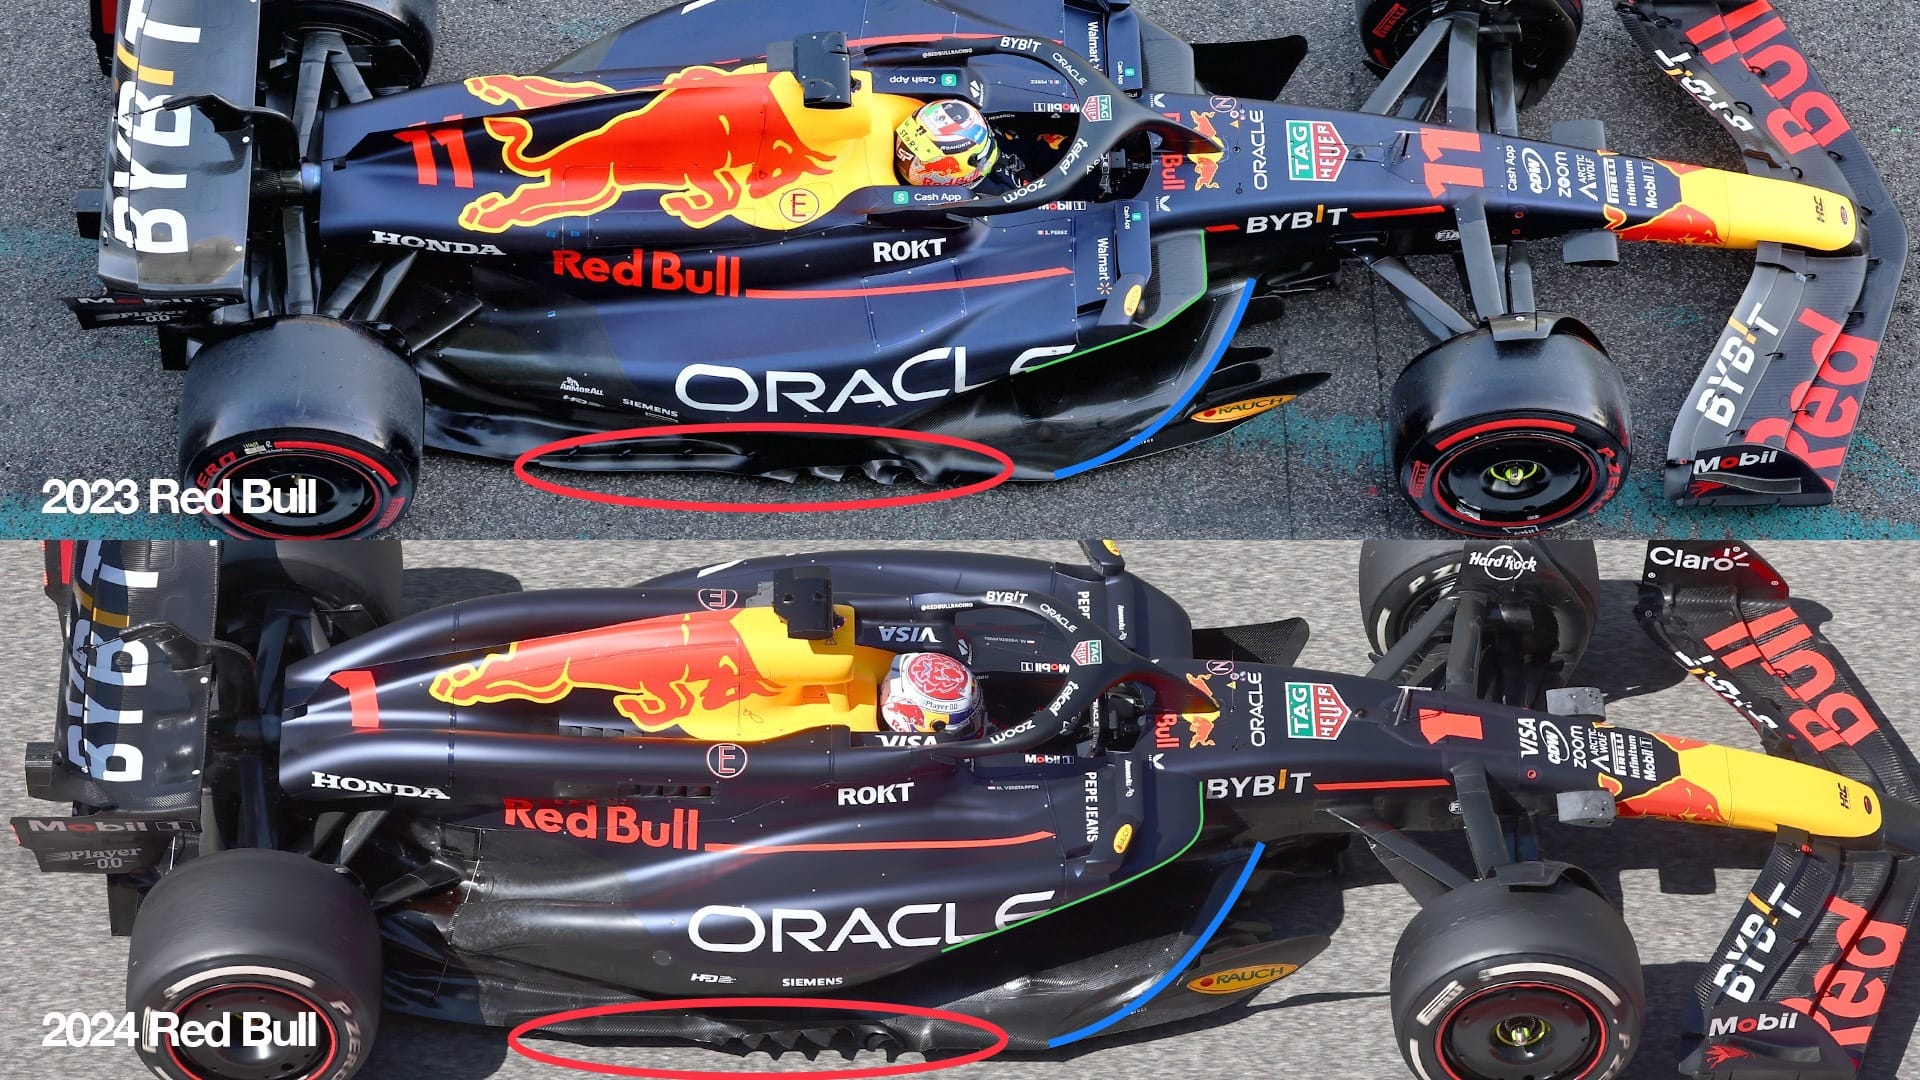 Gary Anderson What's really going on inside Red Bull's new sidepods